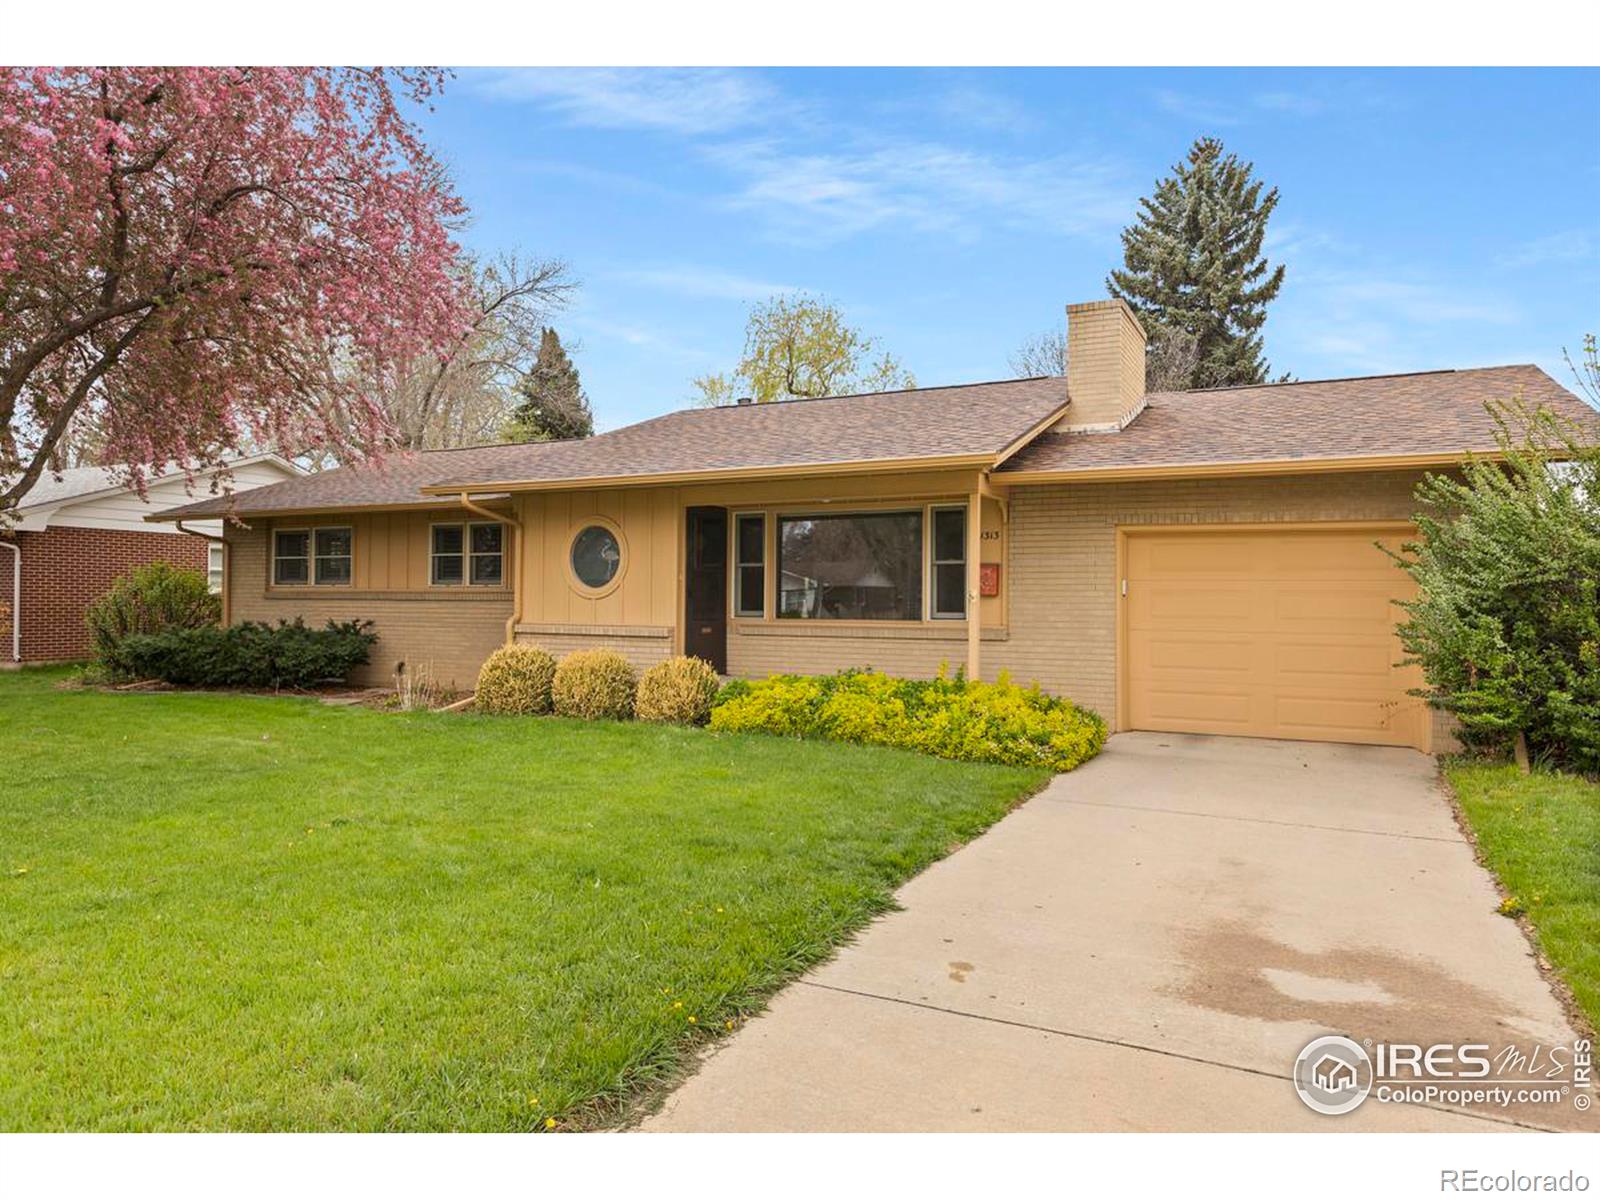 Report Image for 1313  Stover Street,Fort Collins, Colorado